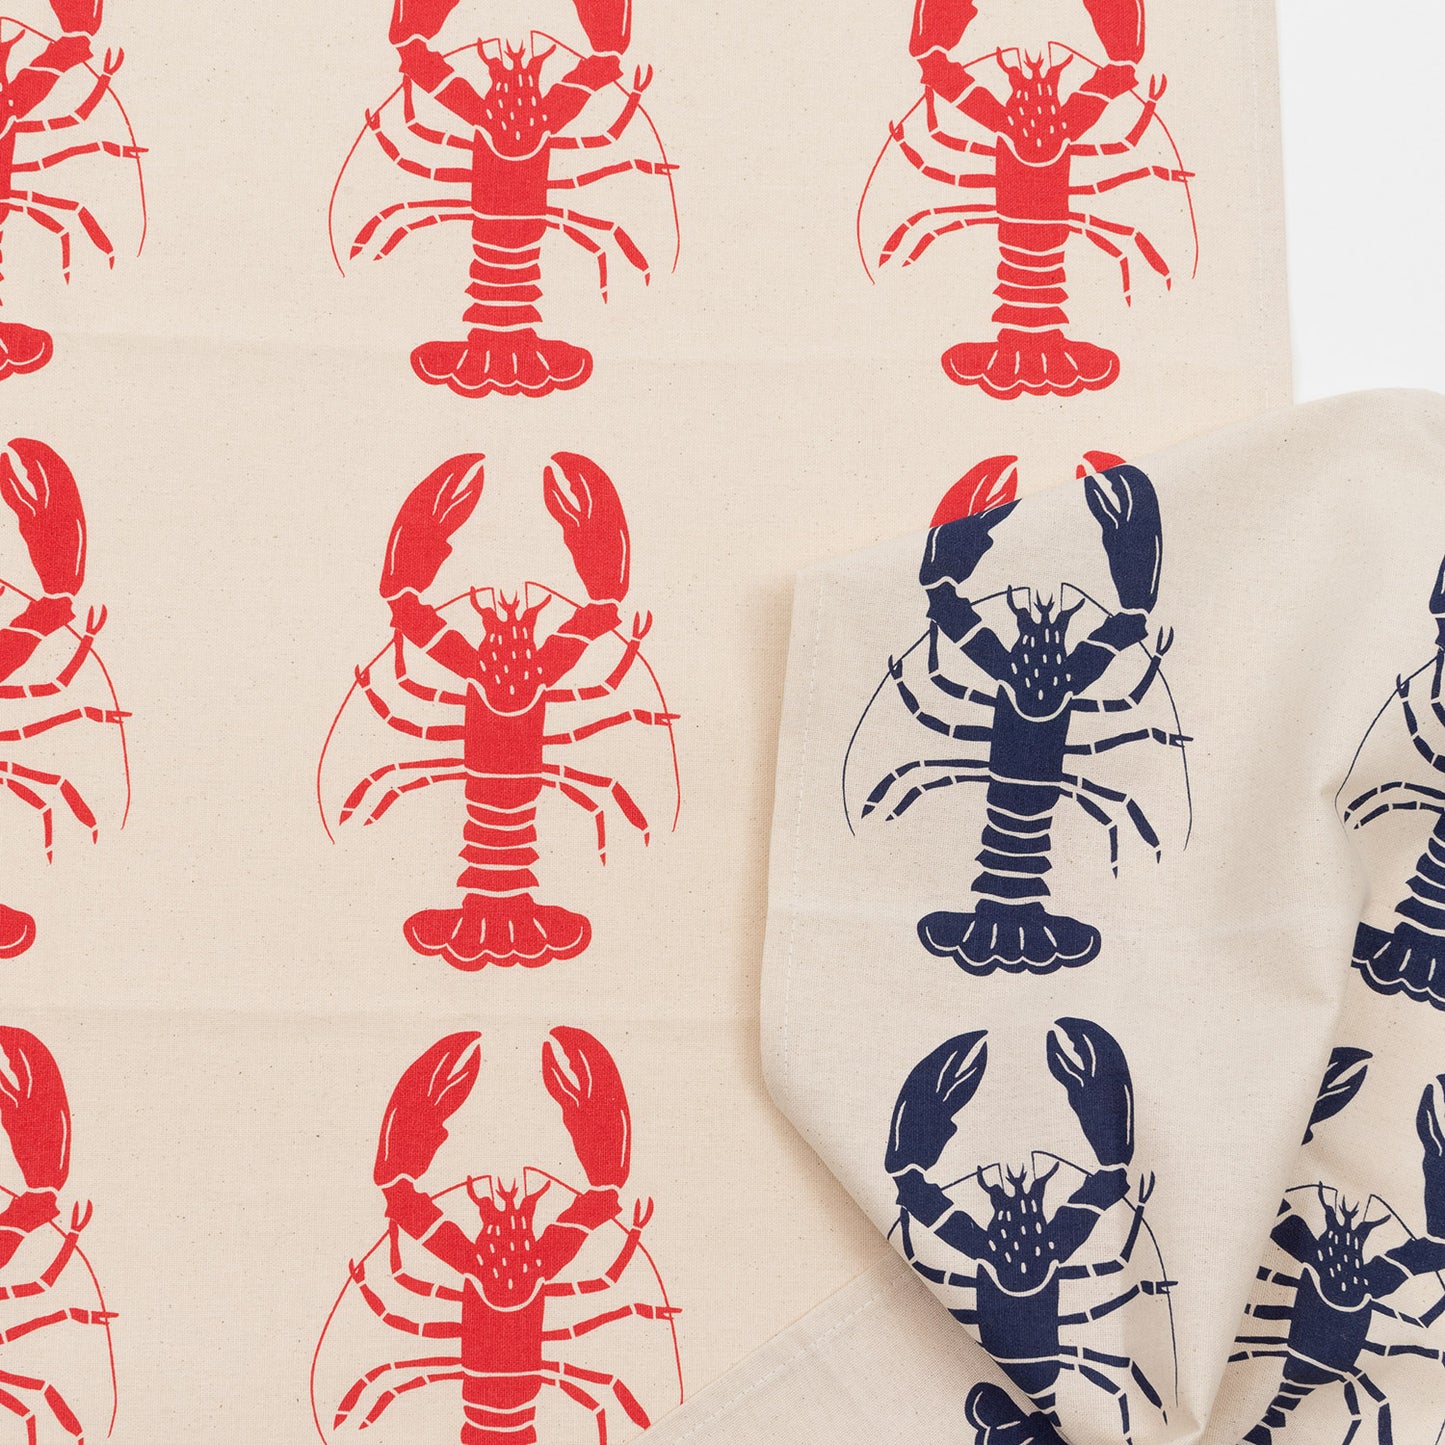 Red lobster repeating pattern on a cream coloured back ground. The Red Lobster Tea Towel is overlaid by the navy version of the tea towel.